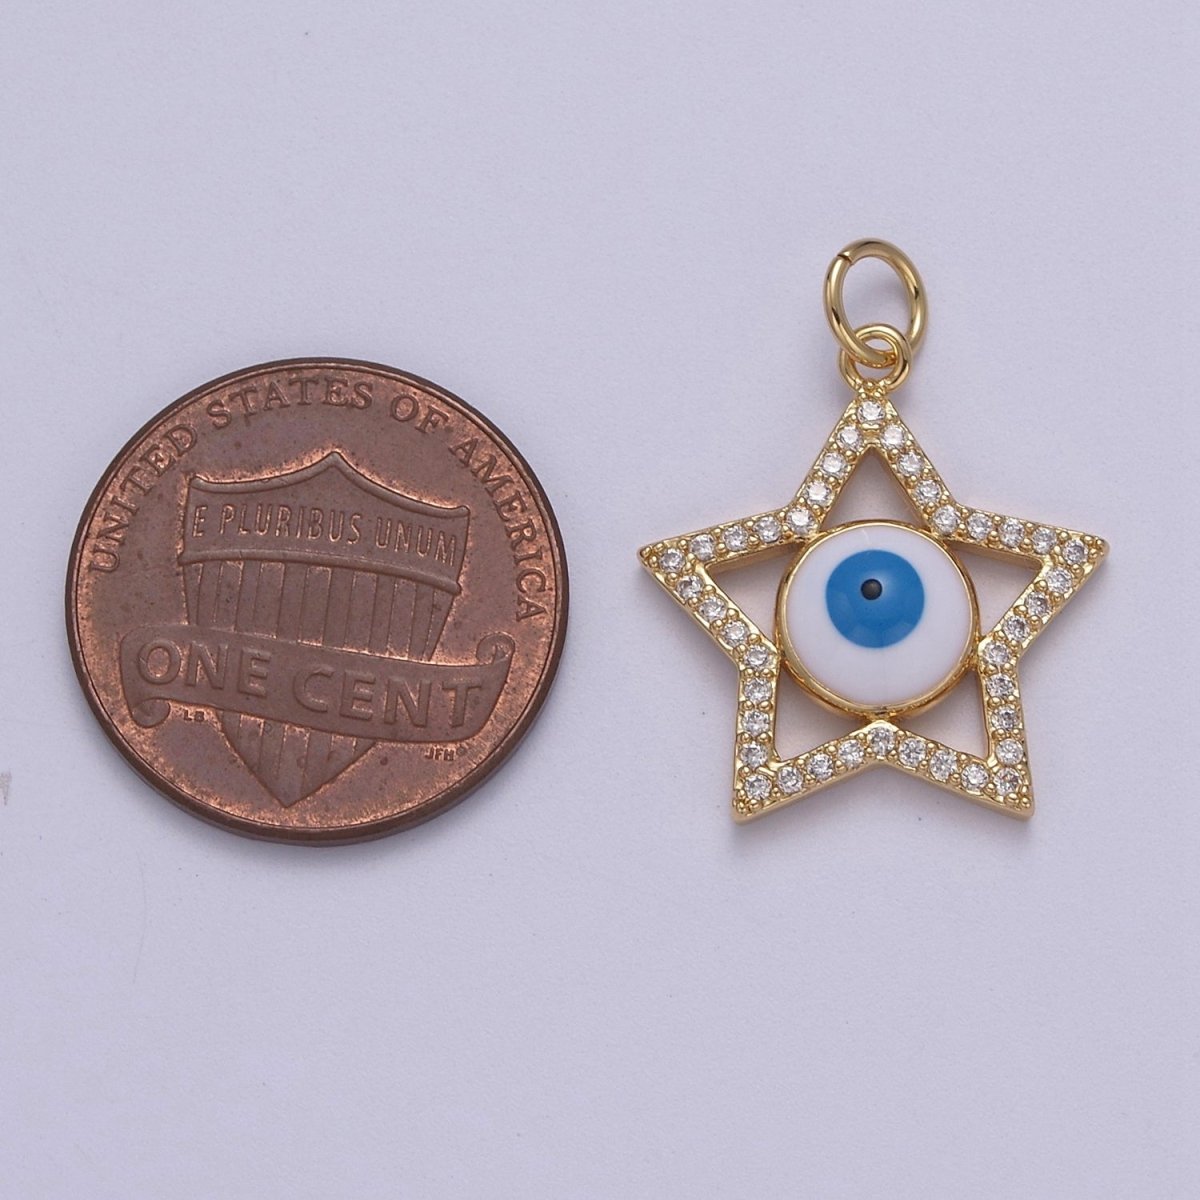 Star Cubic Evil Eye Charm, 14K Gold Filled Micro CZ Pave Pendant, 18*23mm, Necklace Earring Bracelet Making, Jewelry Finding D-762 - DLUXCA